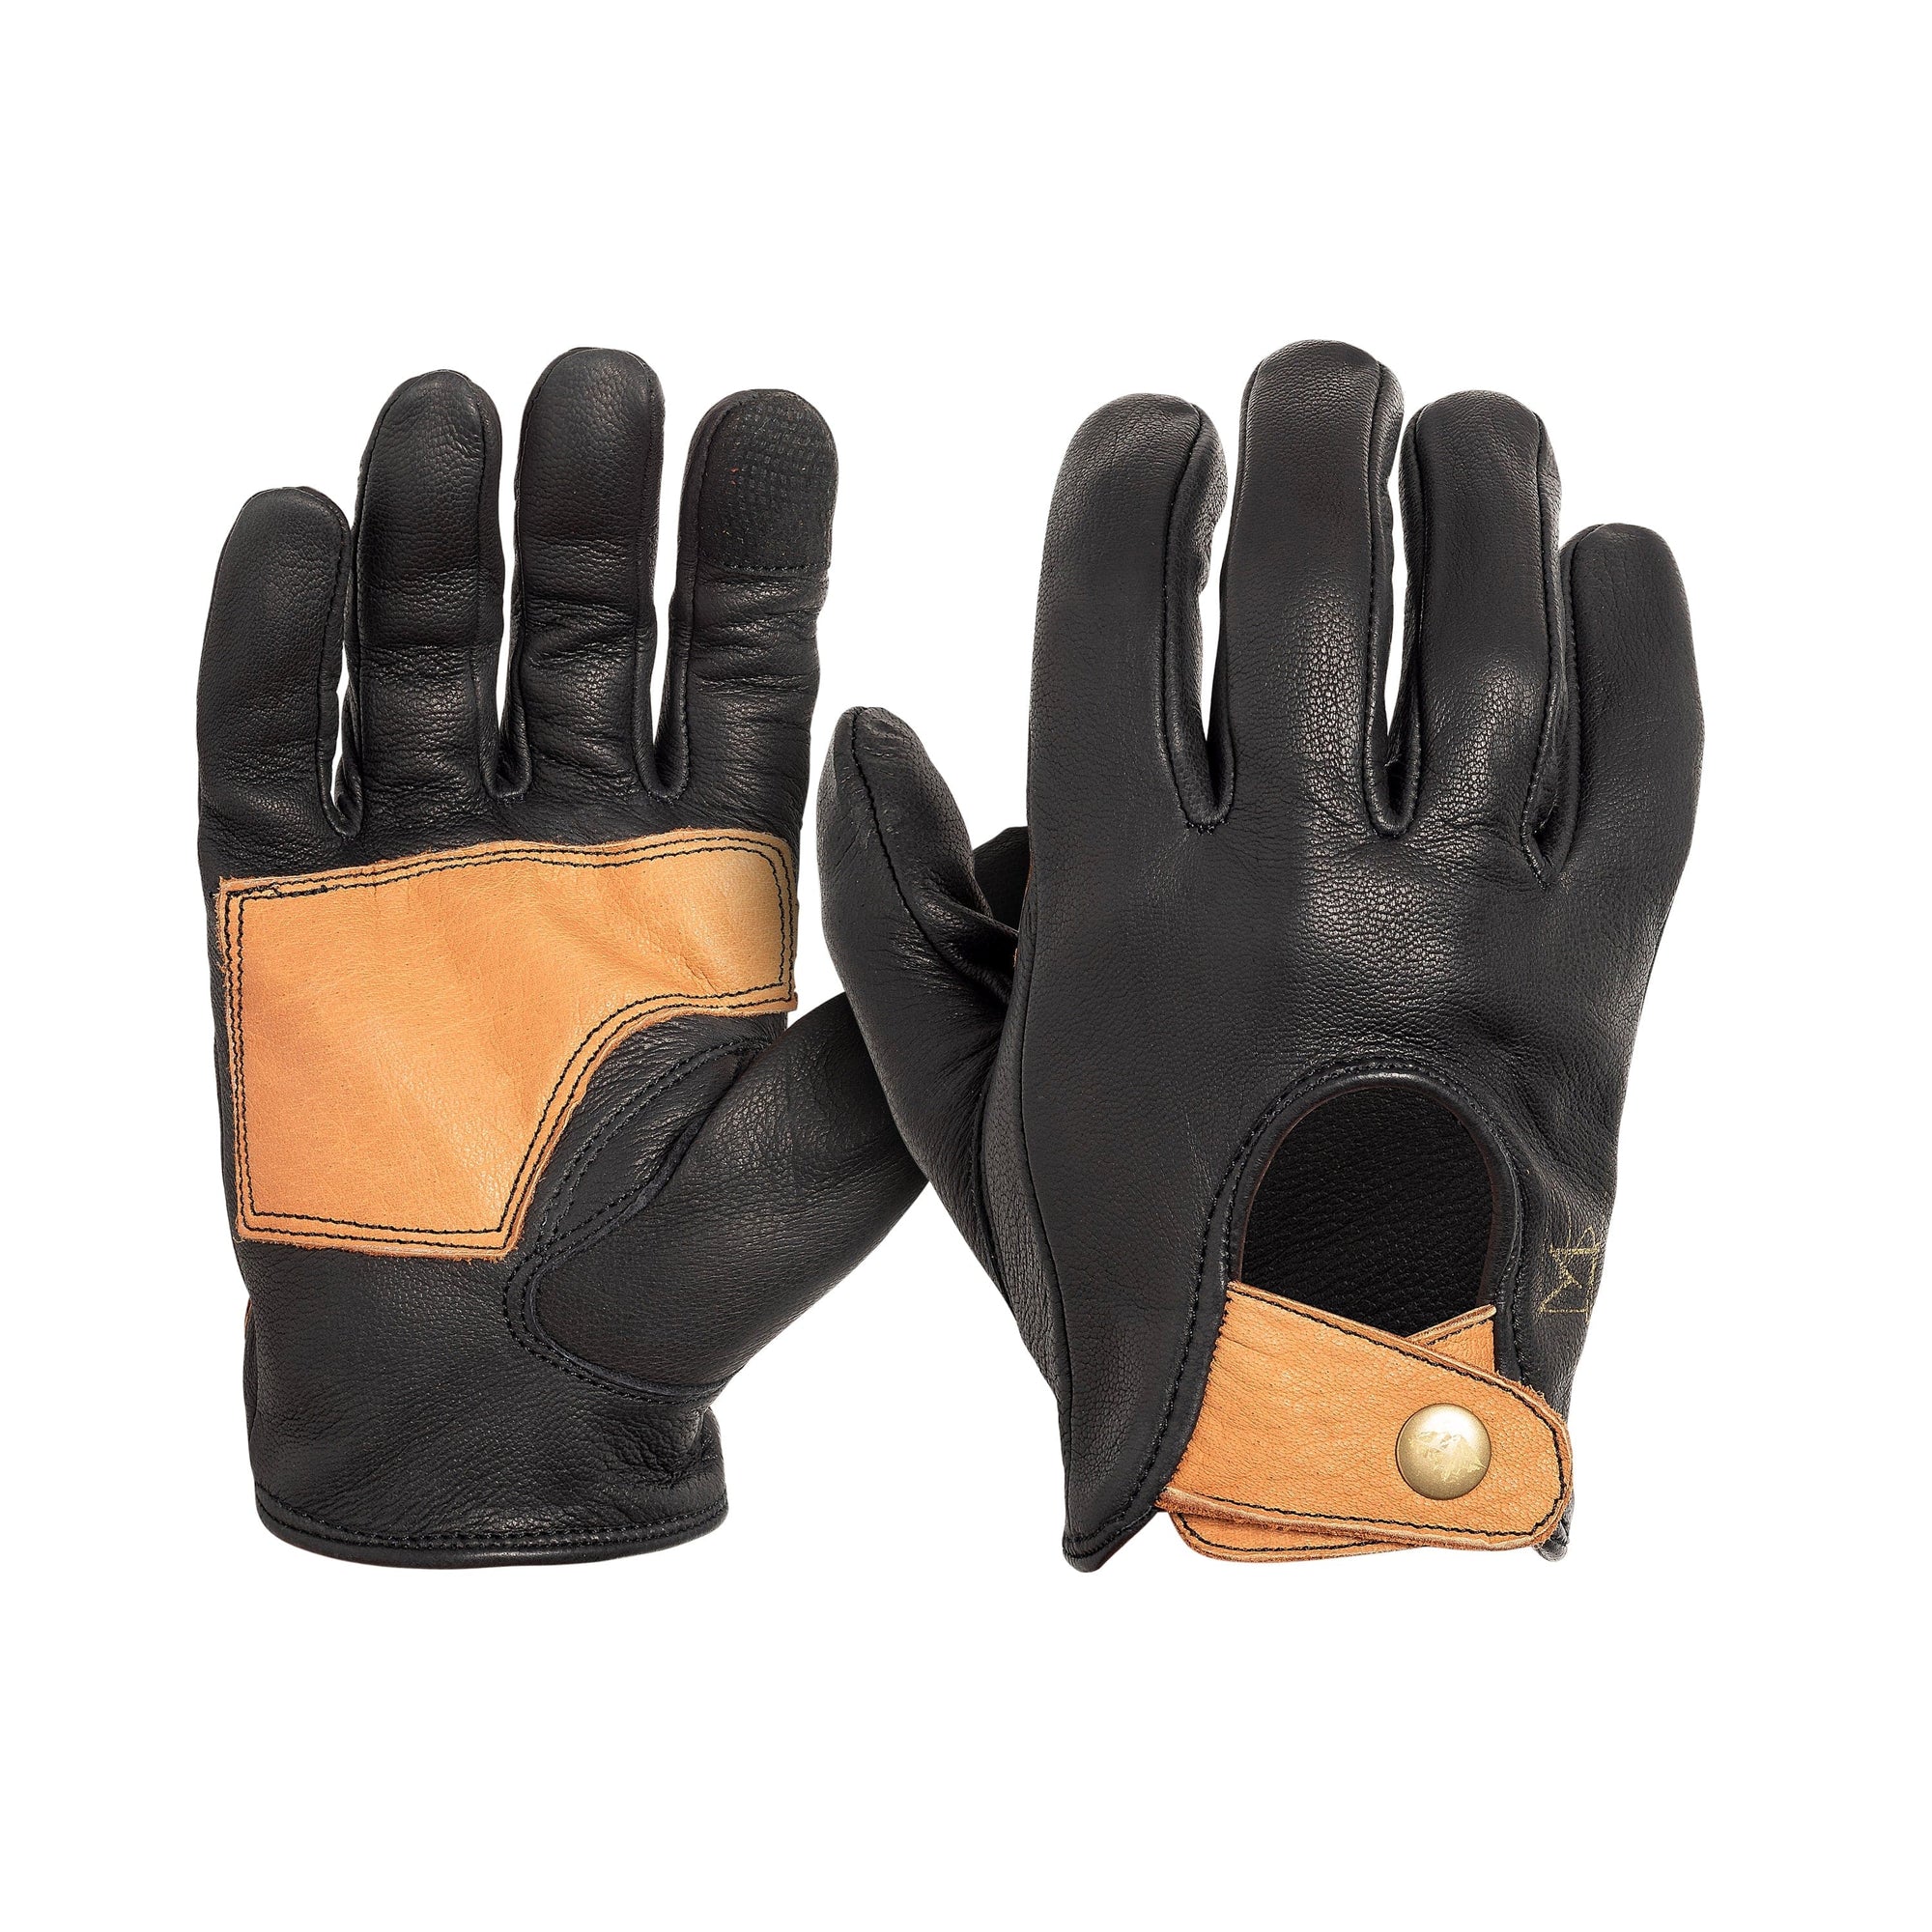 Maroon Bell Outdoor® Gloves XS Dipped Leather Deer Glove: Lion Guard Driving Glove: Black/Brown